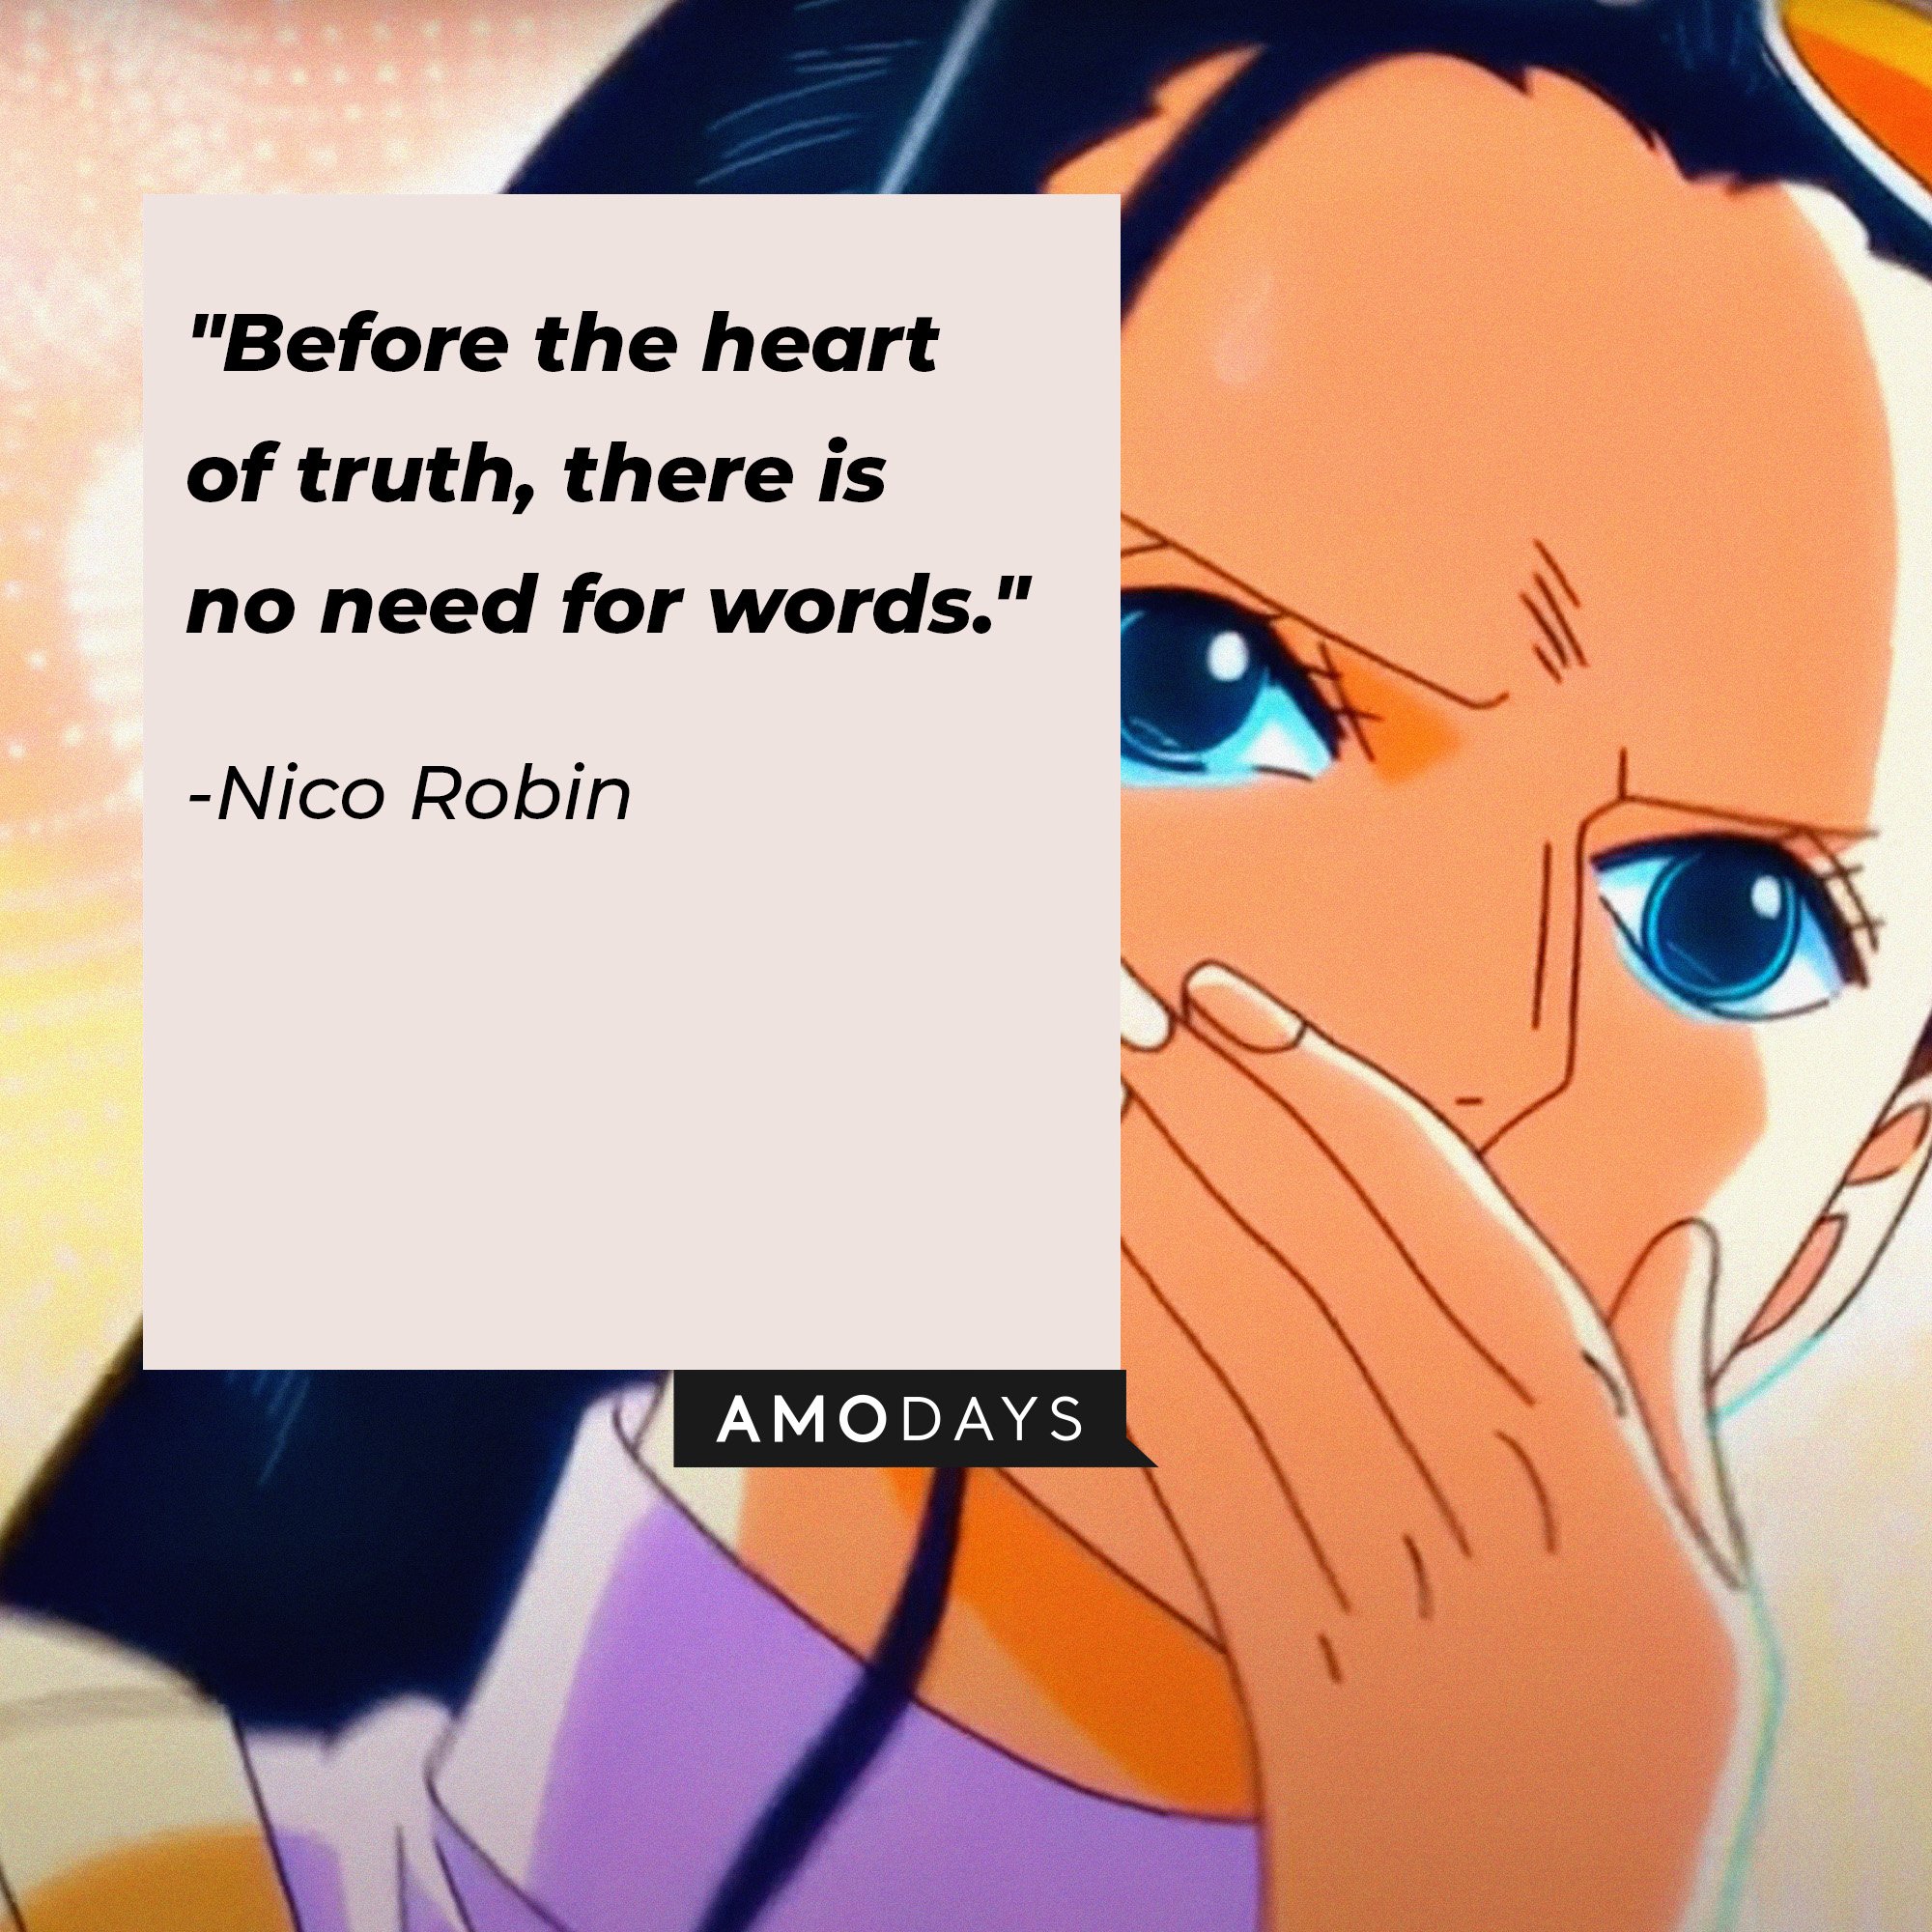 Nico Robin’s quote: "Before the heart of truth, there is no need for words."  | Image: AmoDays